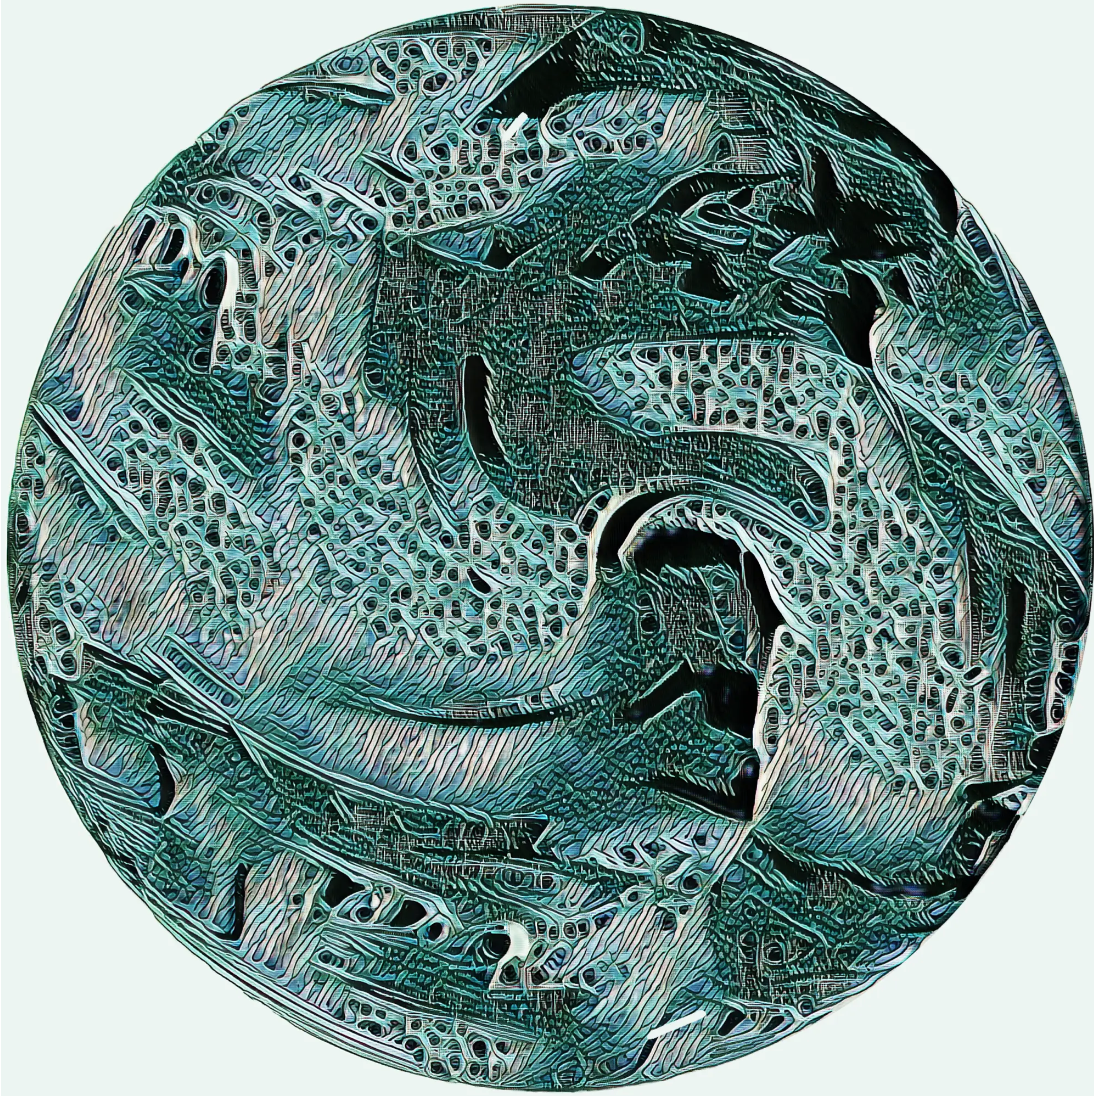 A circle is filed with digitially rendered ridges and shapes in shades of turquoise